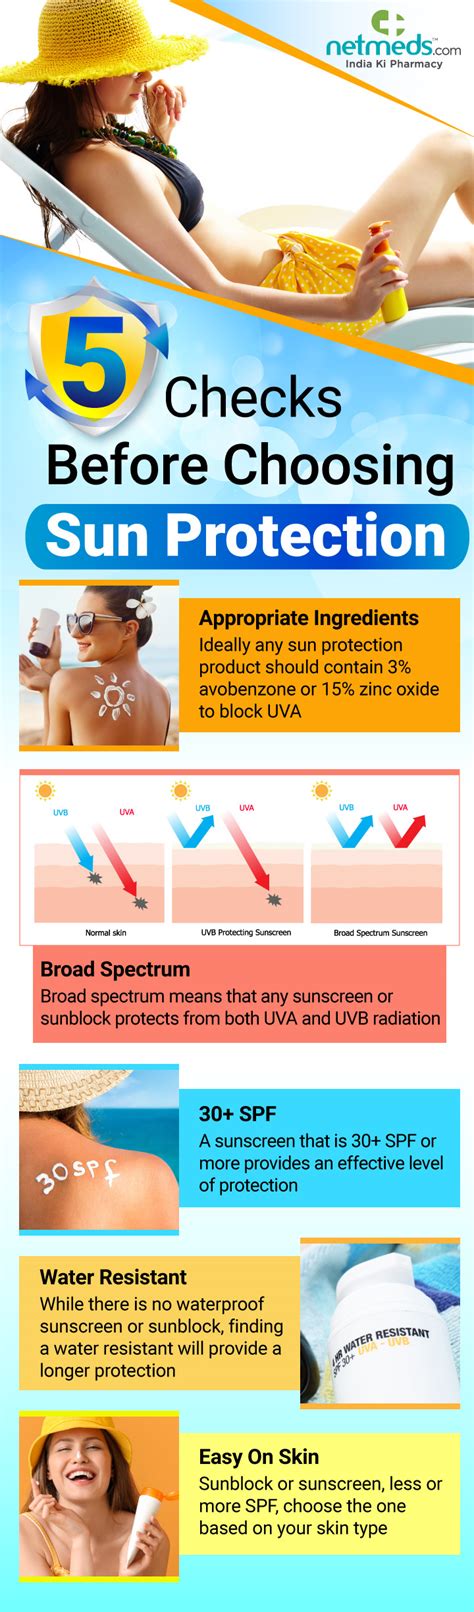 Sunscreen Exposed: Understanding SPF and Ultraviolet Magic Mirrors